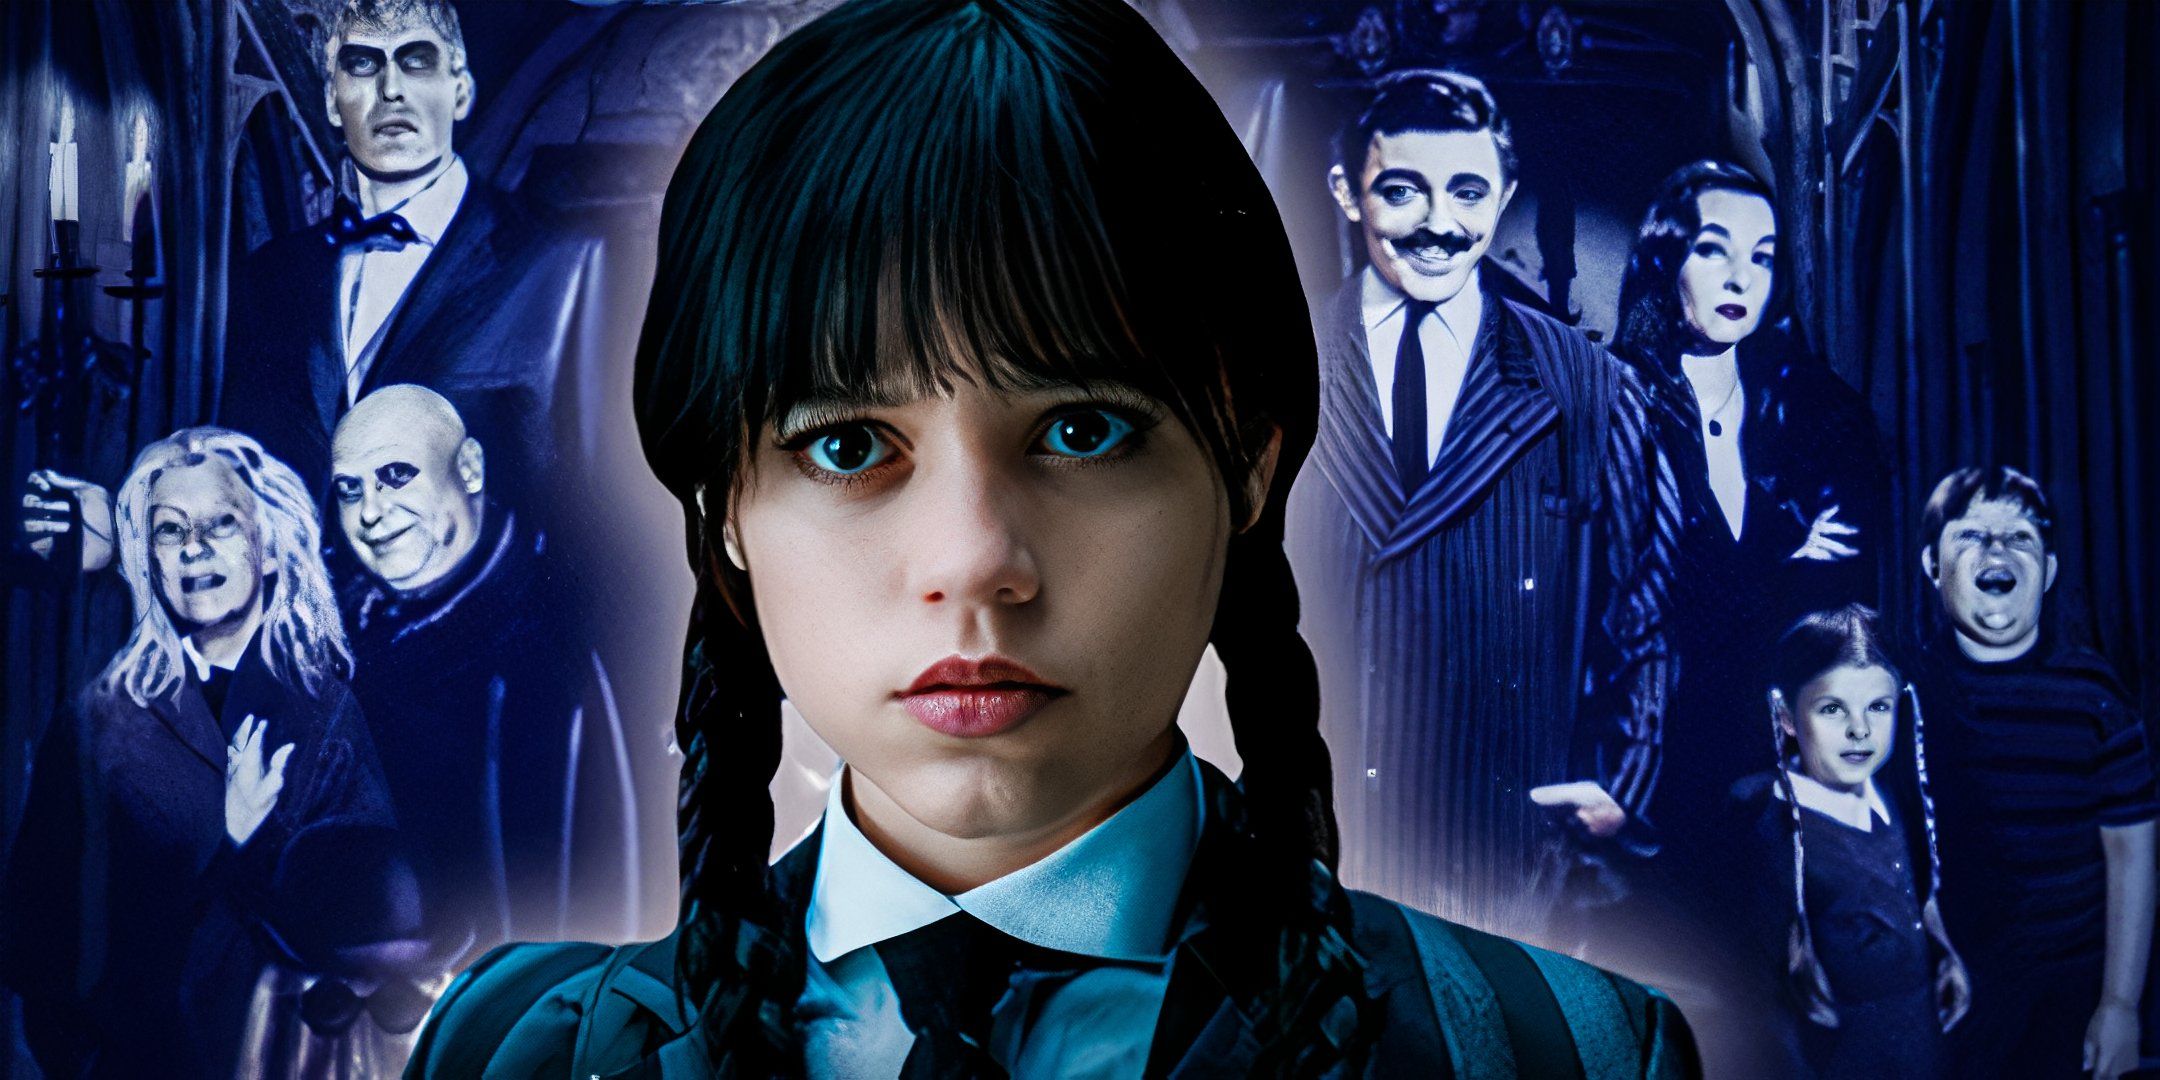 Jenna Ortega as Wednesday Addams from Wednesday with the Addams Family from the 1960s sitcom